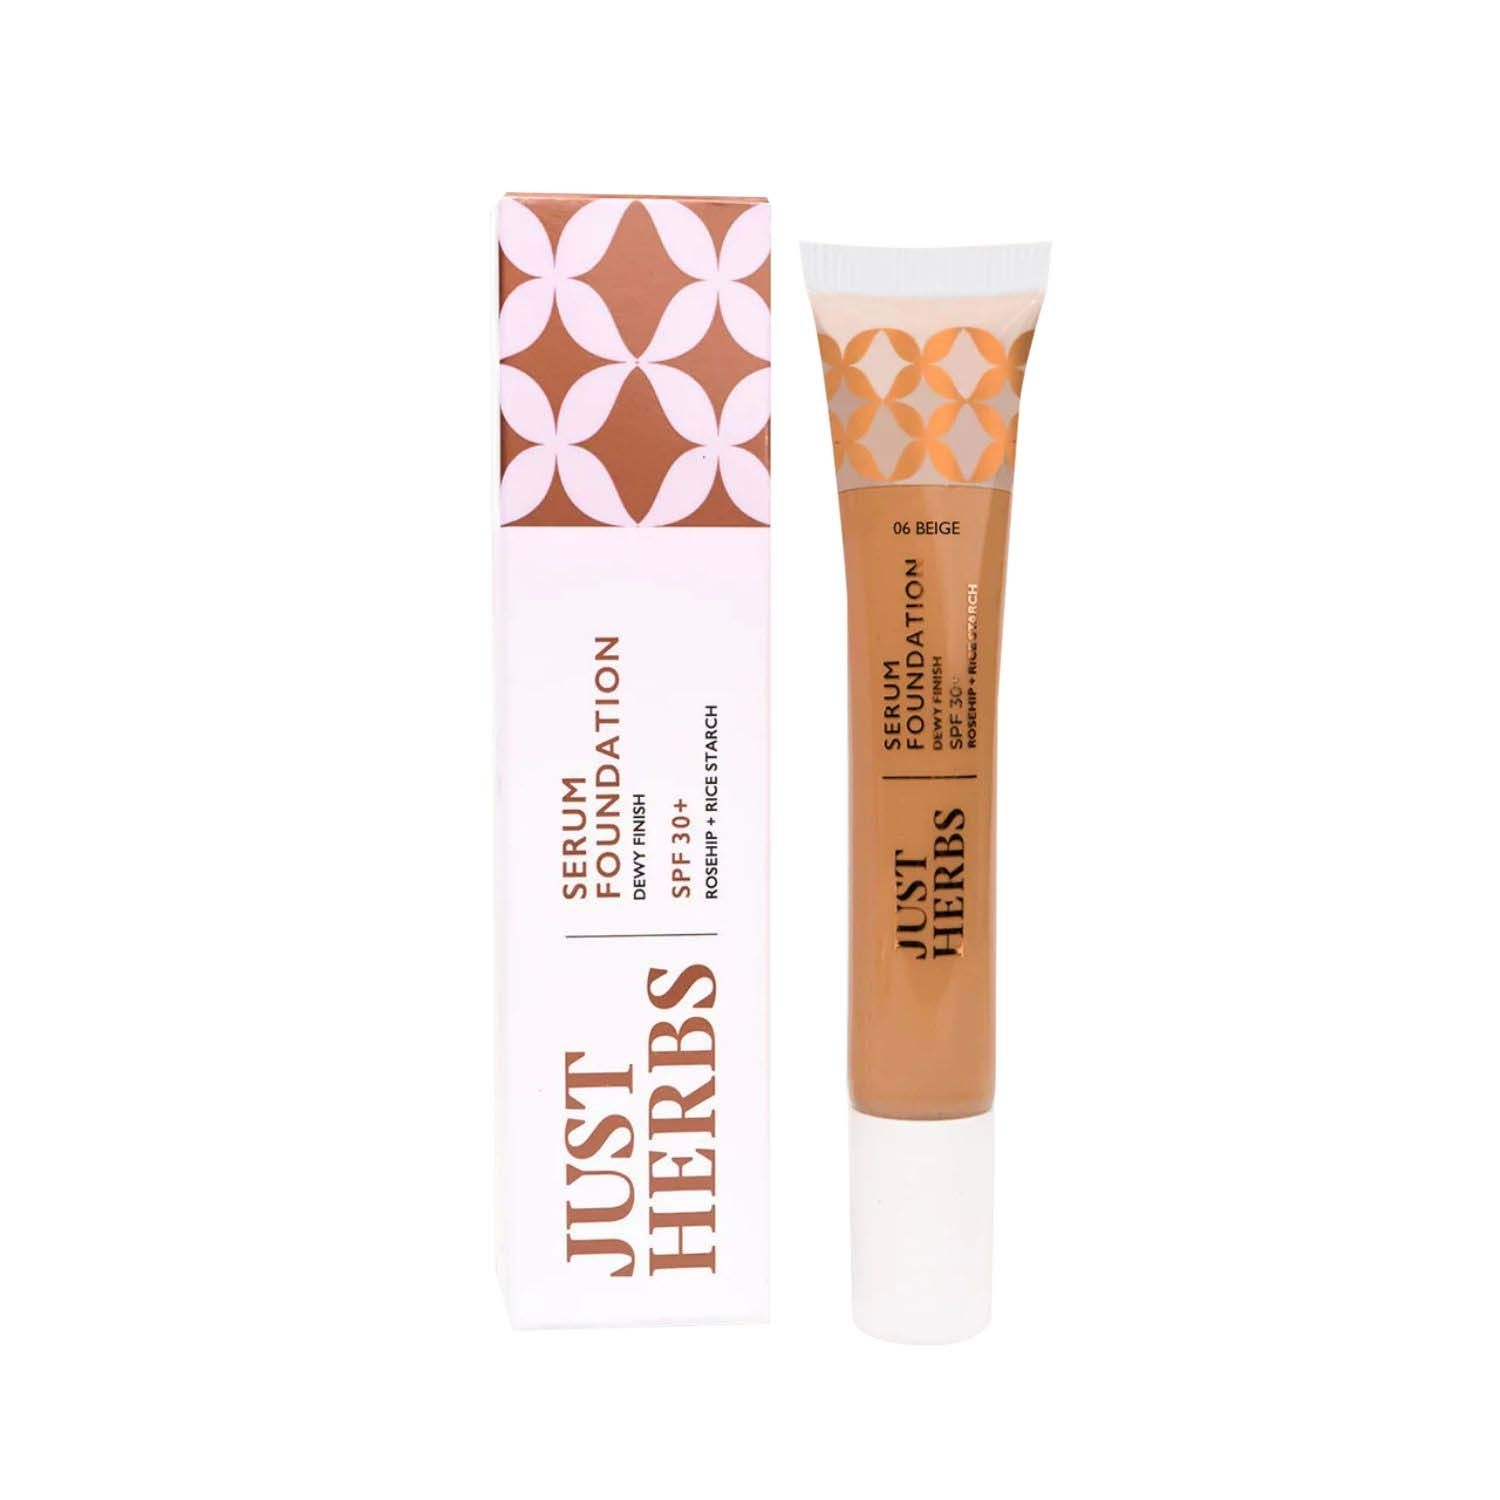 Just Herbs Serum Foundation Dewy Finish SPF 30+ With Rosehip & Rice Starch - 06 Beige (20ml)